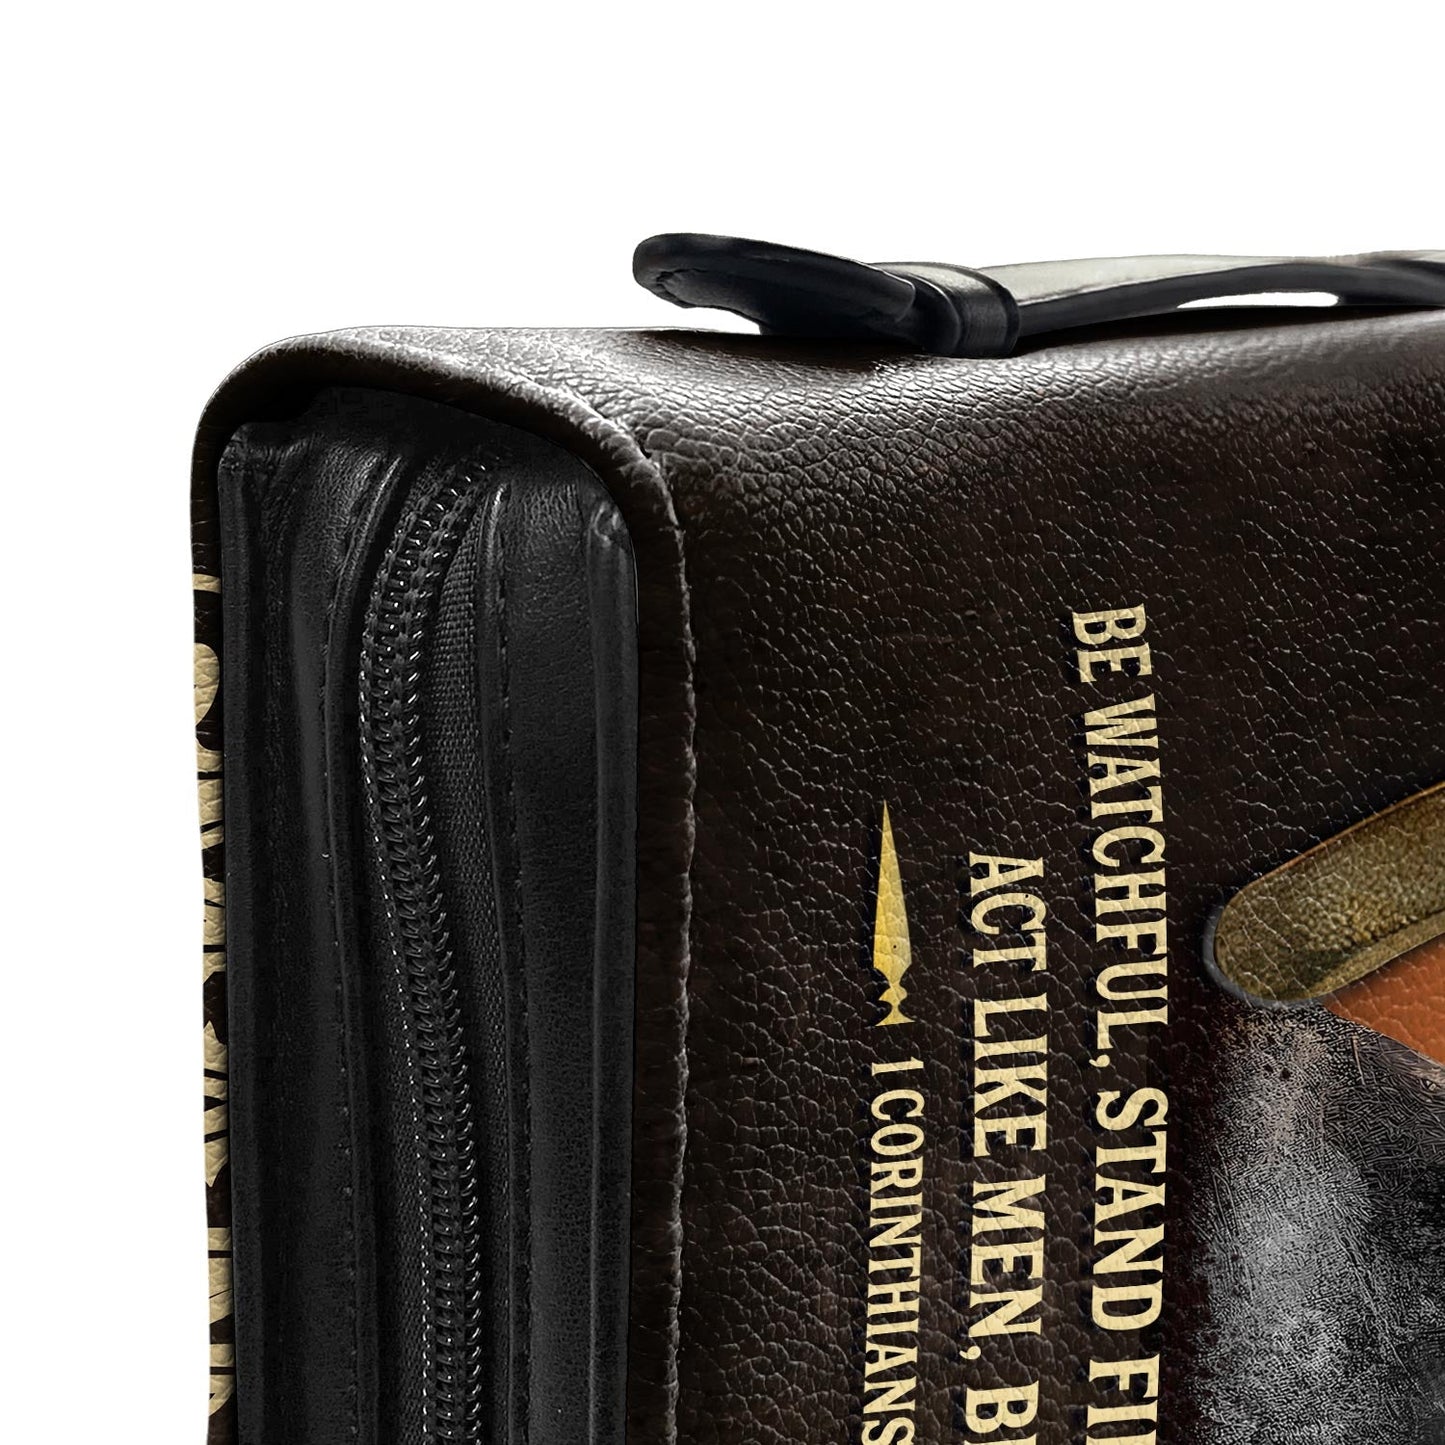 Man Of Faith Be Watchful Stand Firm In The Faith Act Like Men Be Strong 1 Corinthians 16 13 Personalized Bible Cover